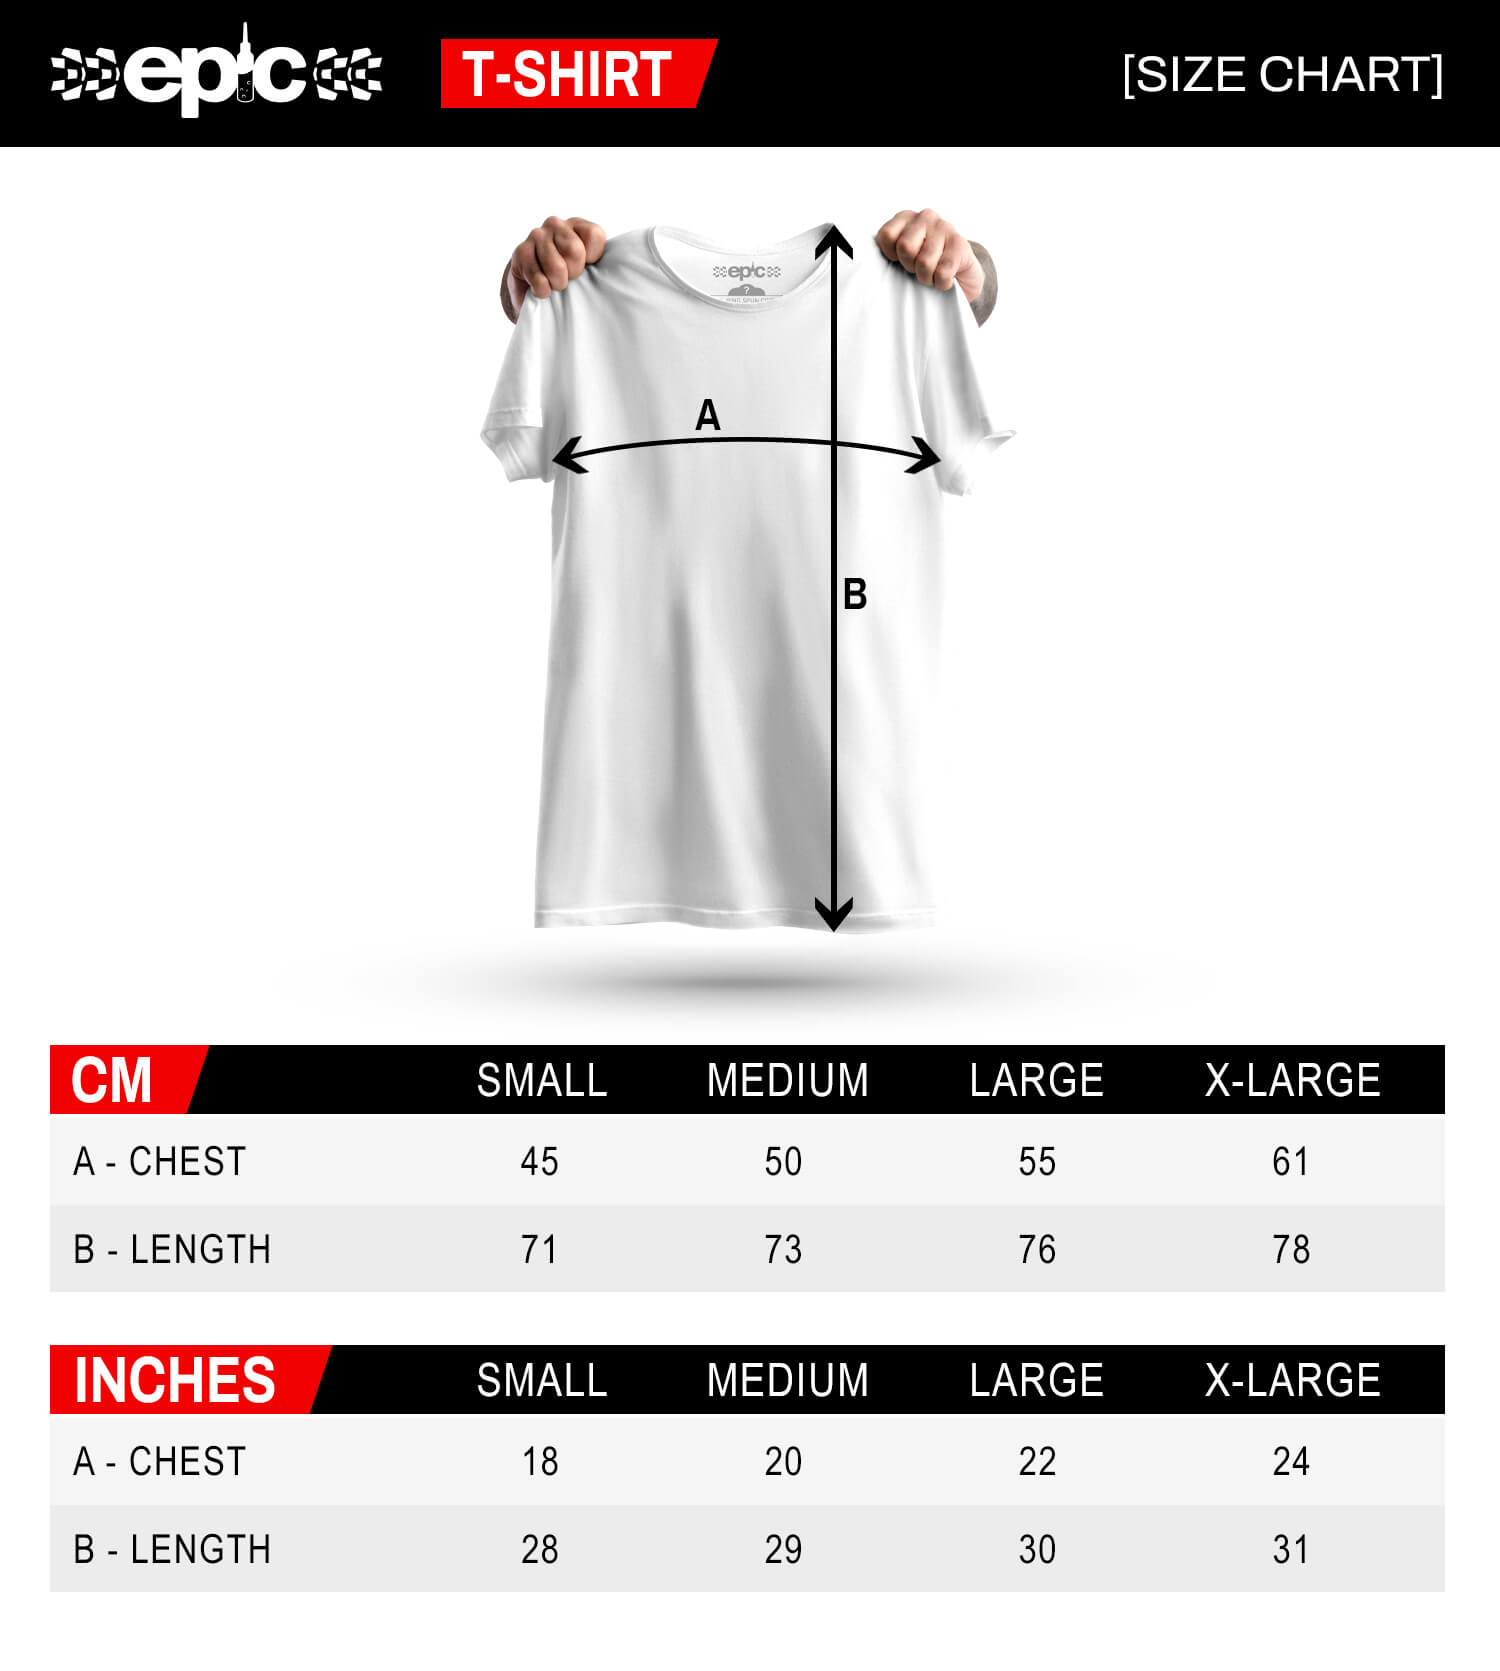 epic t-shirt size chart in cm & inches